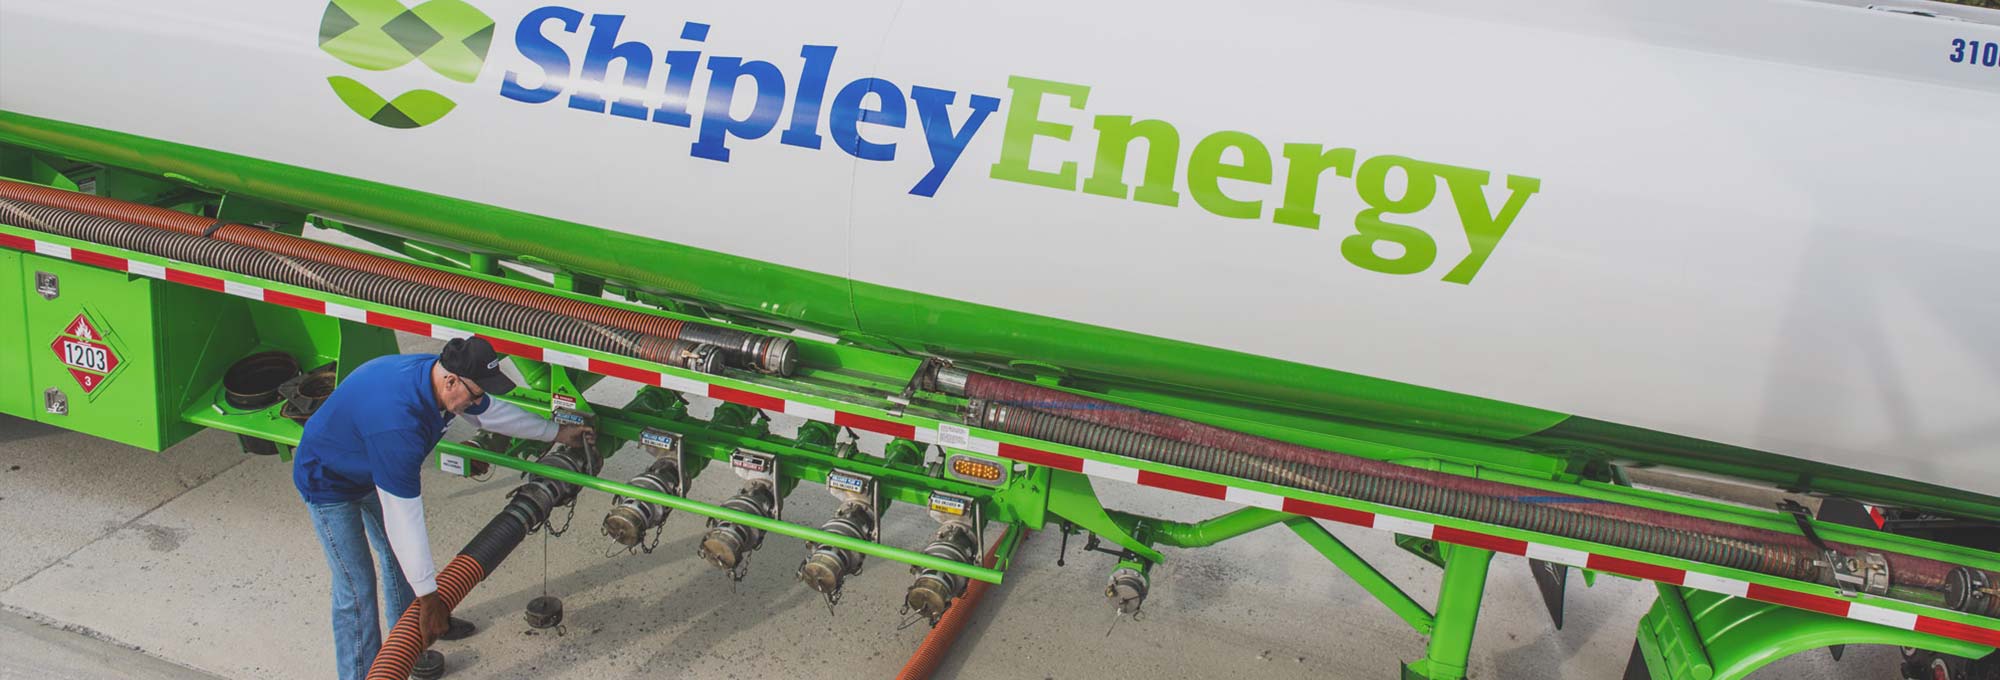 Heat Your Home With Shipley Energy